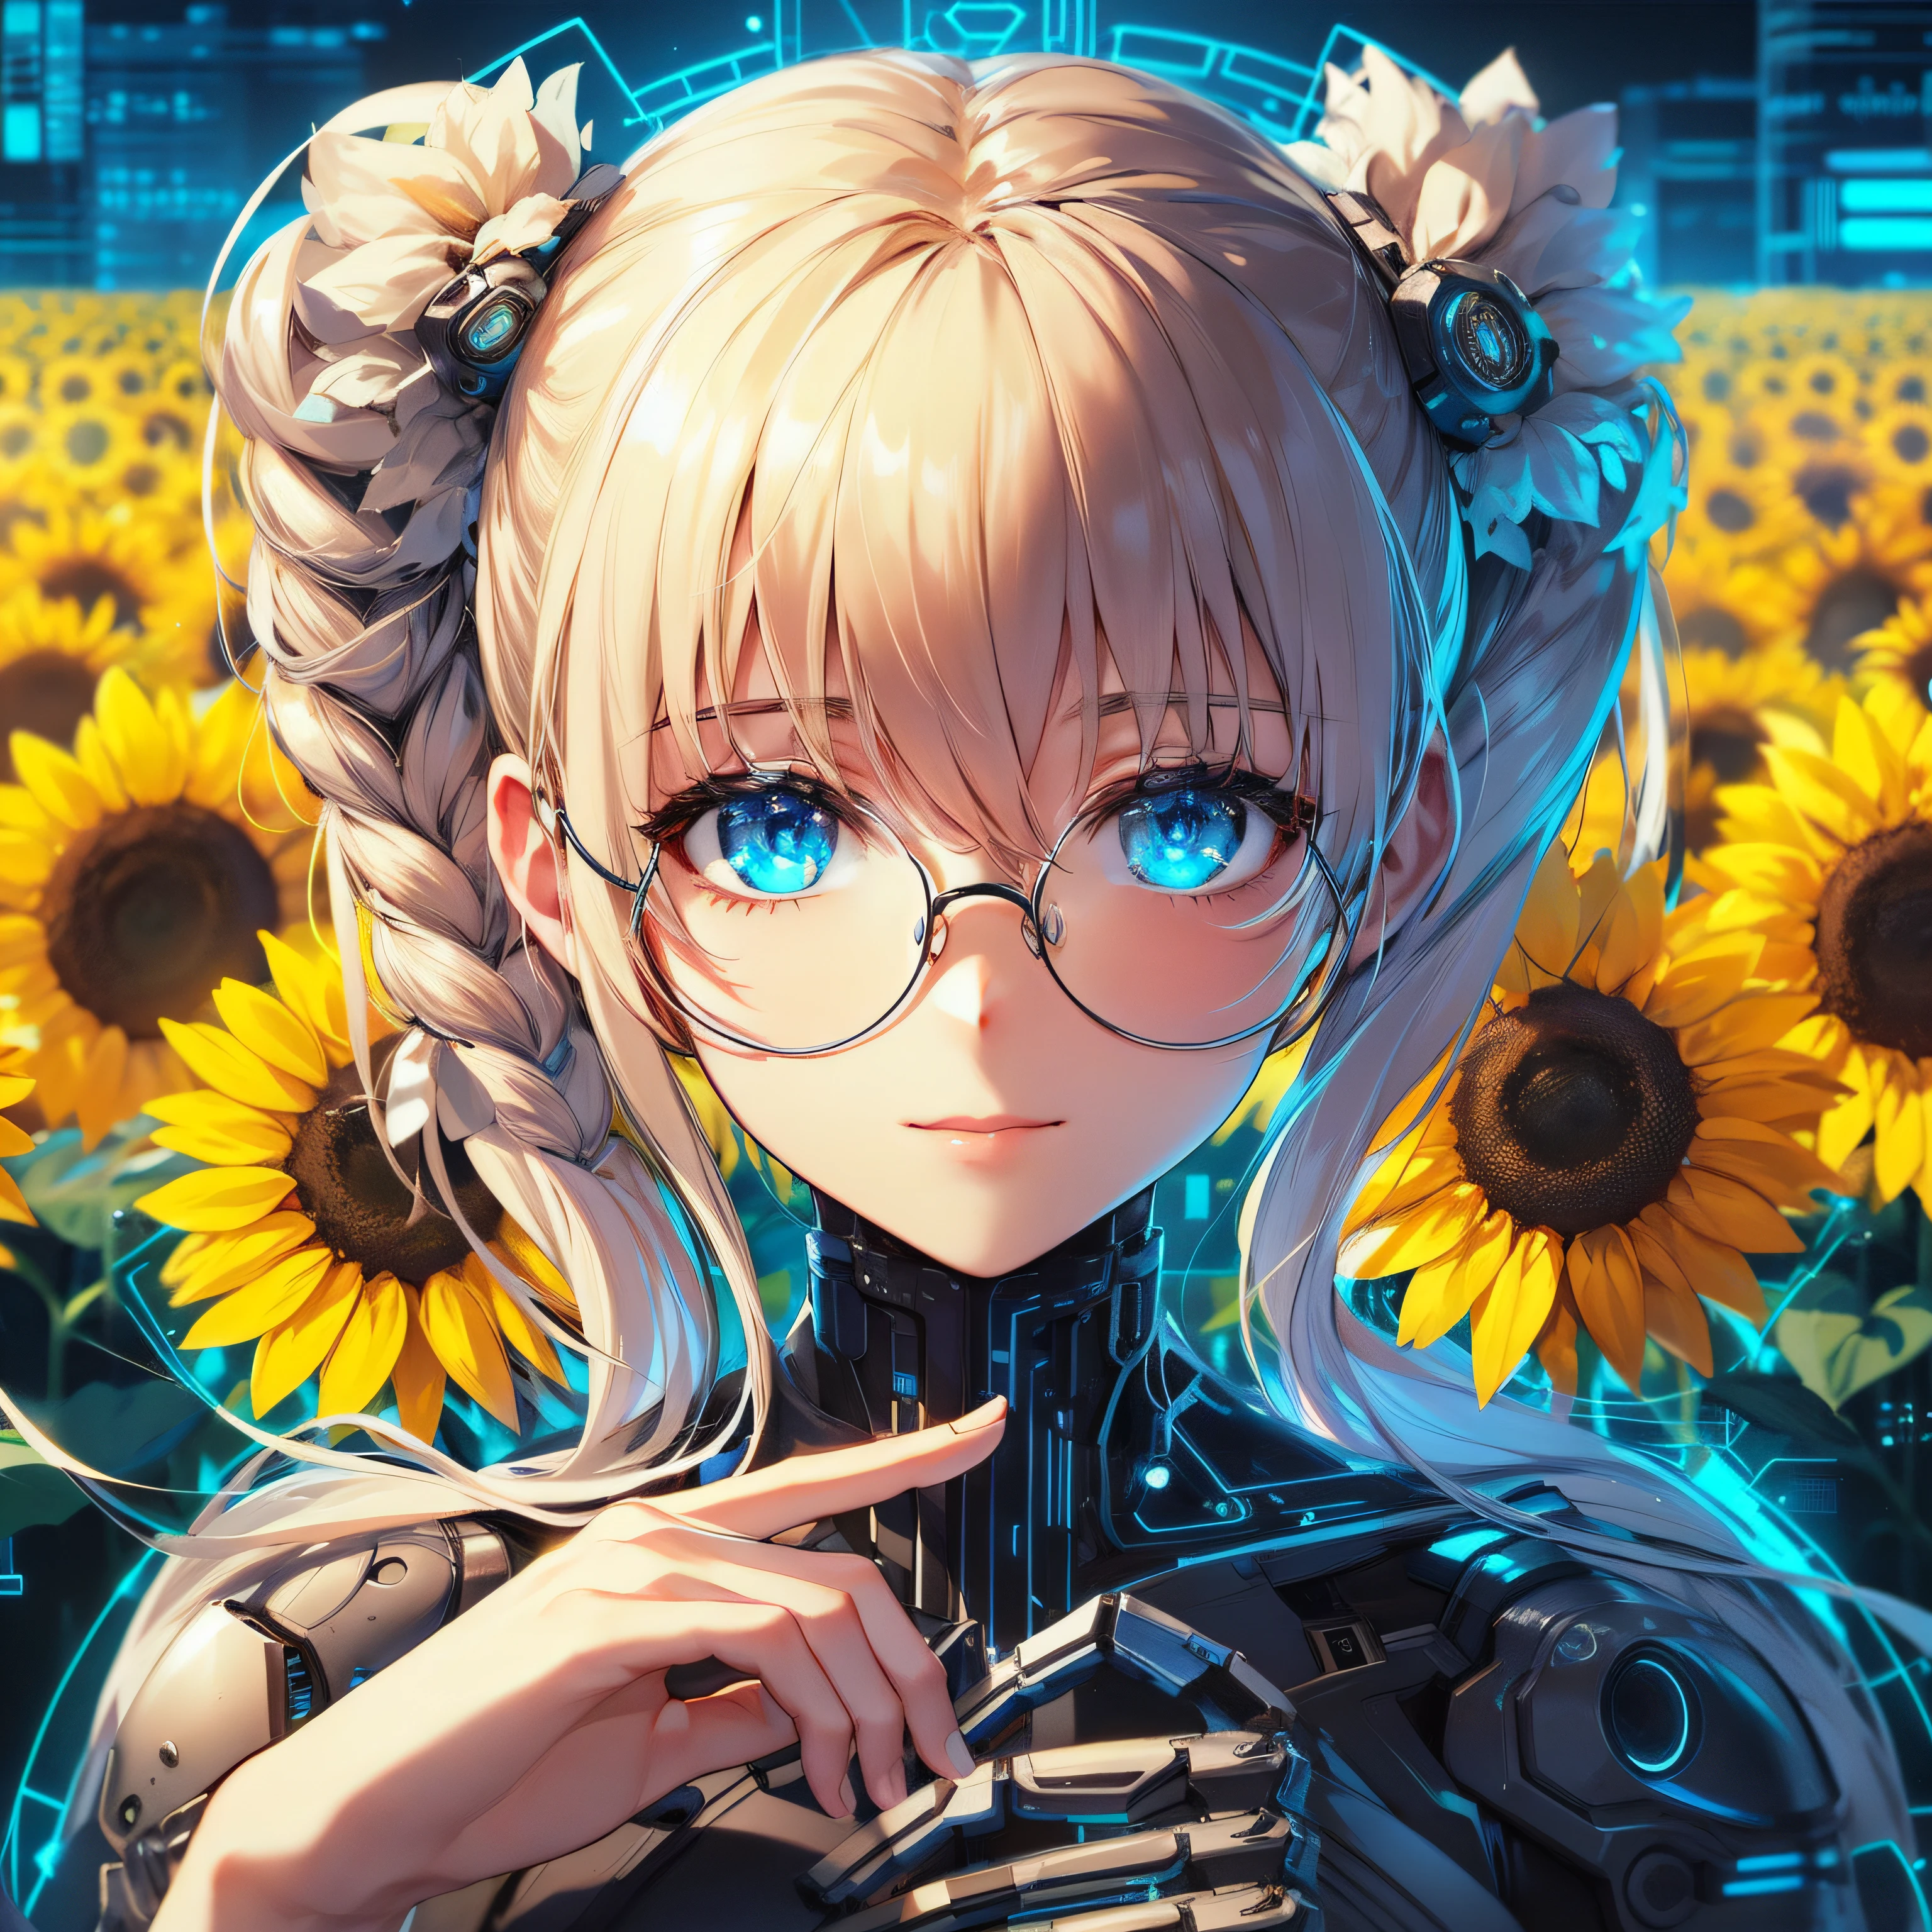 a girl with blonde hair styled in two side ponytails gracefully resting on her shoulders. She wears round glasses that accentuate her captivating blue eyes, all set within a cyberpunk-inspired environment. Picture this character amidst a field of sunflowers, where the vibrant yellow blooms starkly contrast with the futuristic cybernetic backdrop. The fusion of innocent charm, cyberpunk aesthetics, and the added detail of sunflower blooms creates a visually compelling and harmonious scene. left hand is robothands and the right is human,